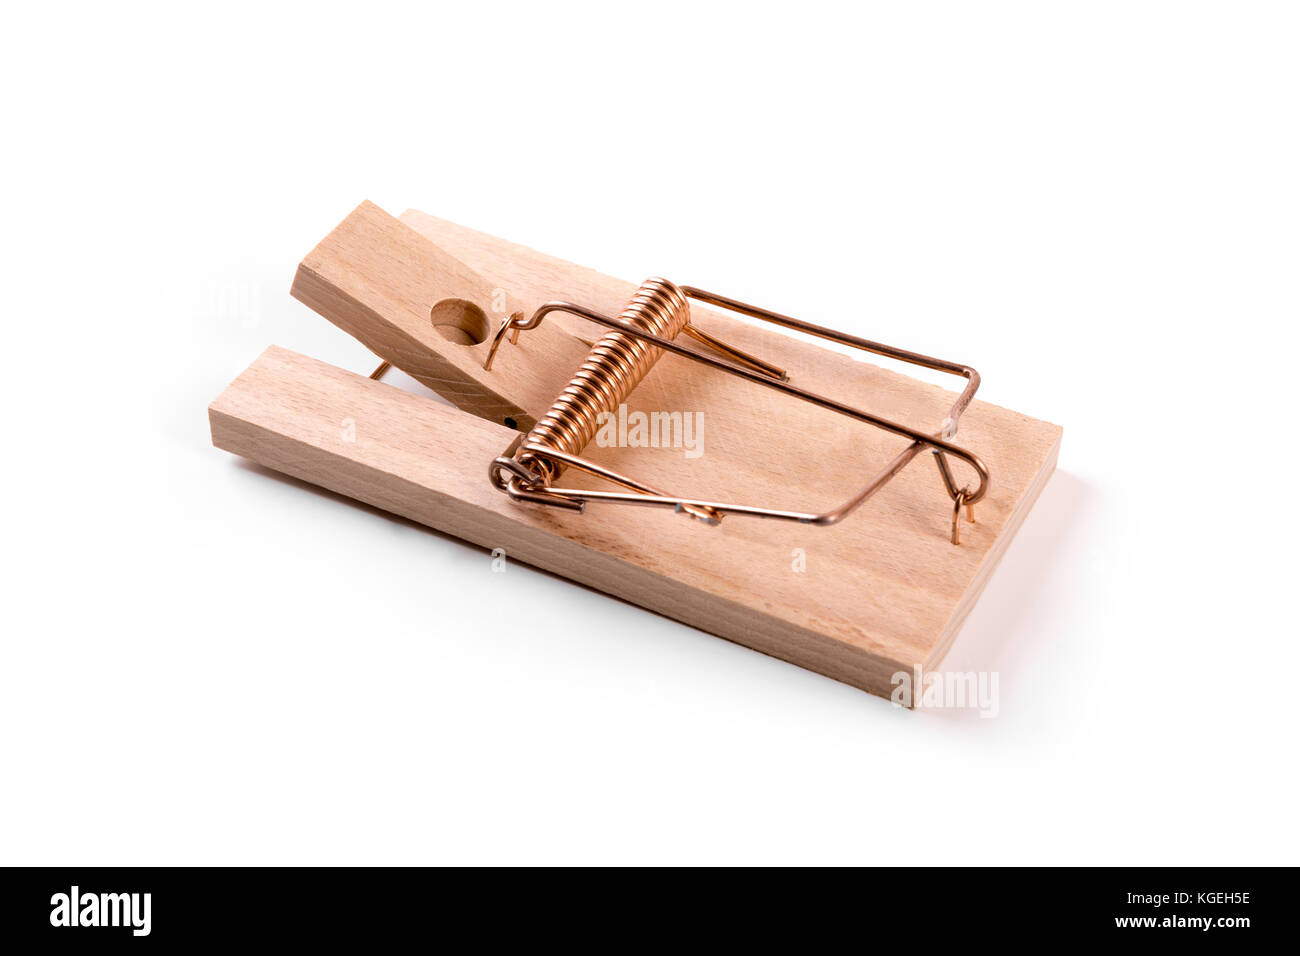 wooden mouse trap isolated on white background Stock Photo